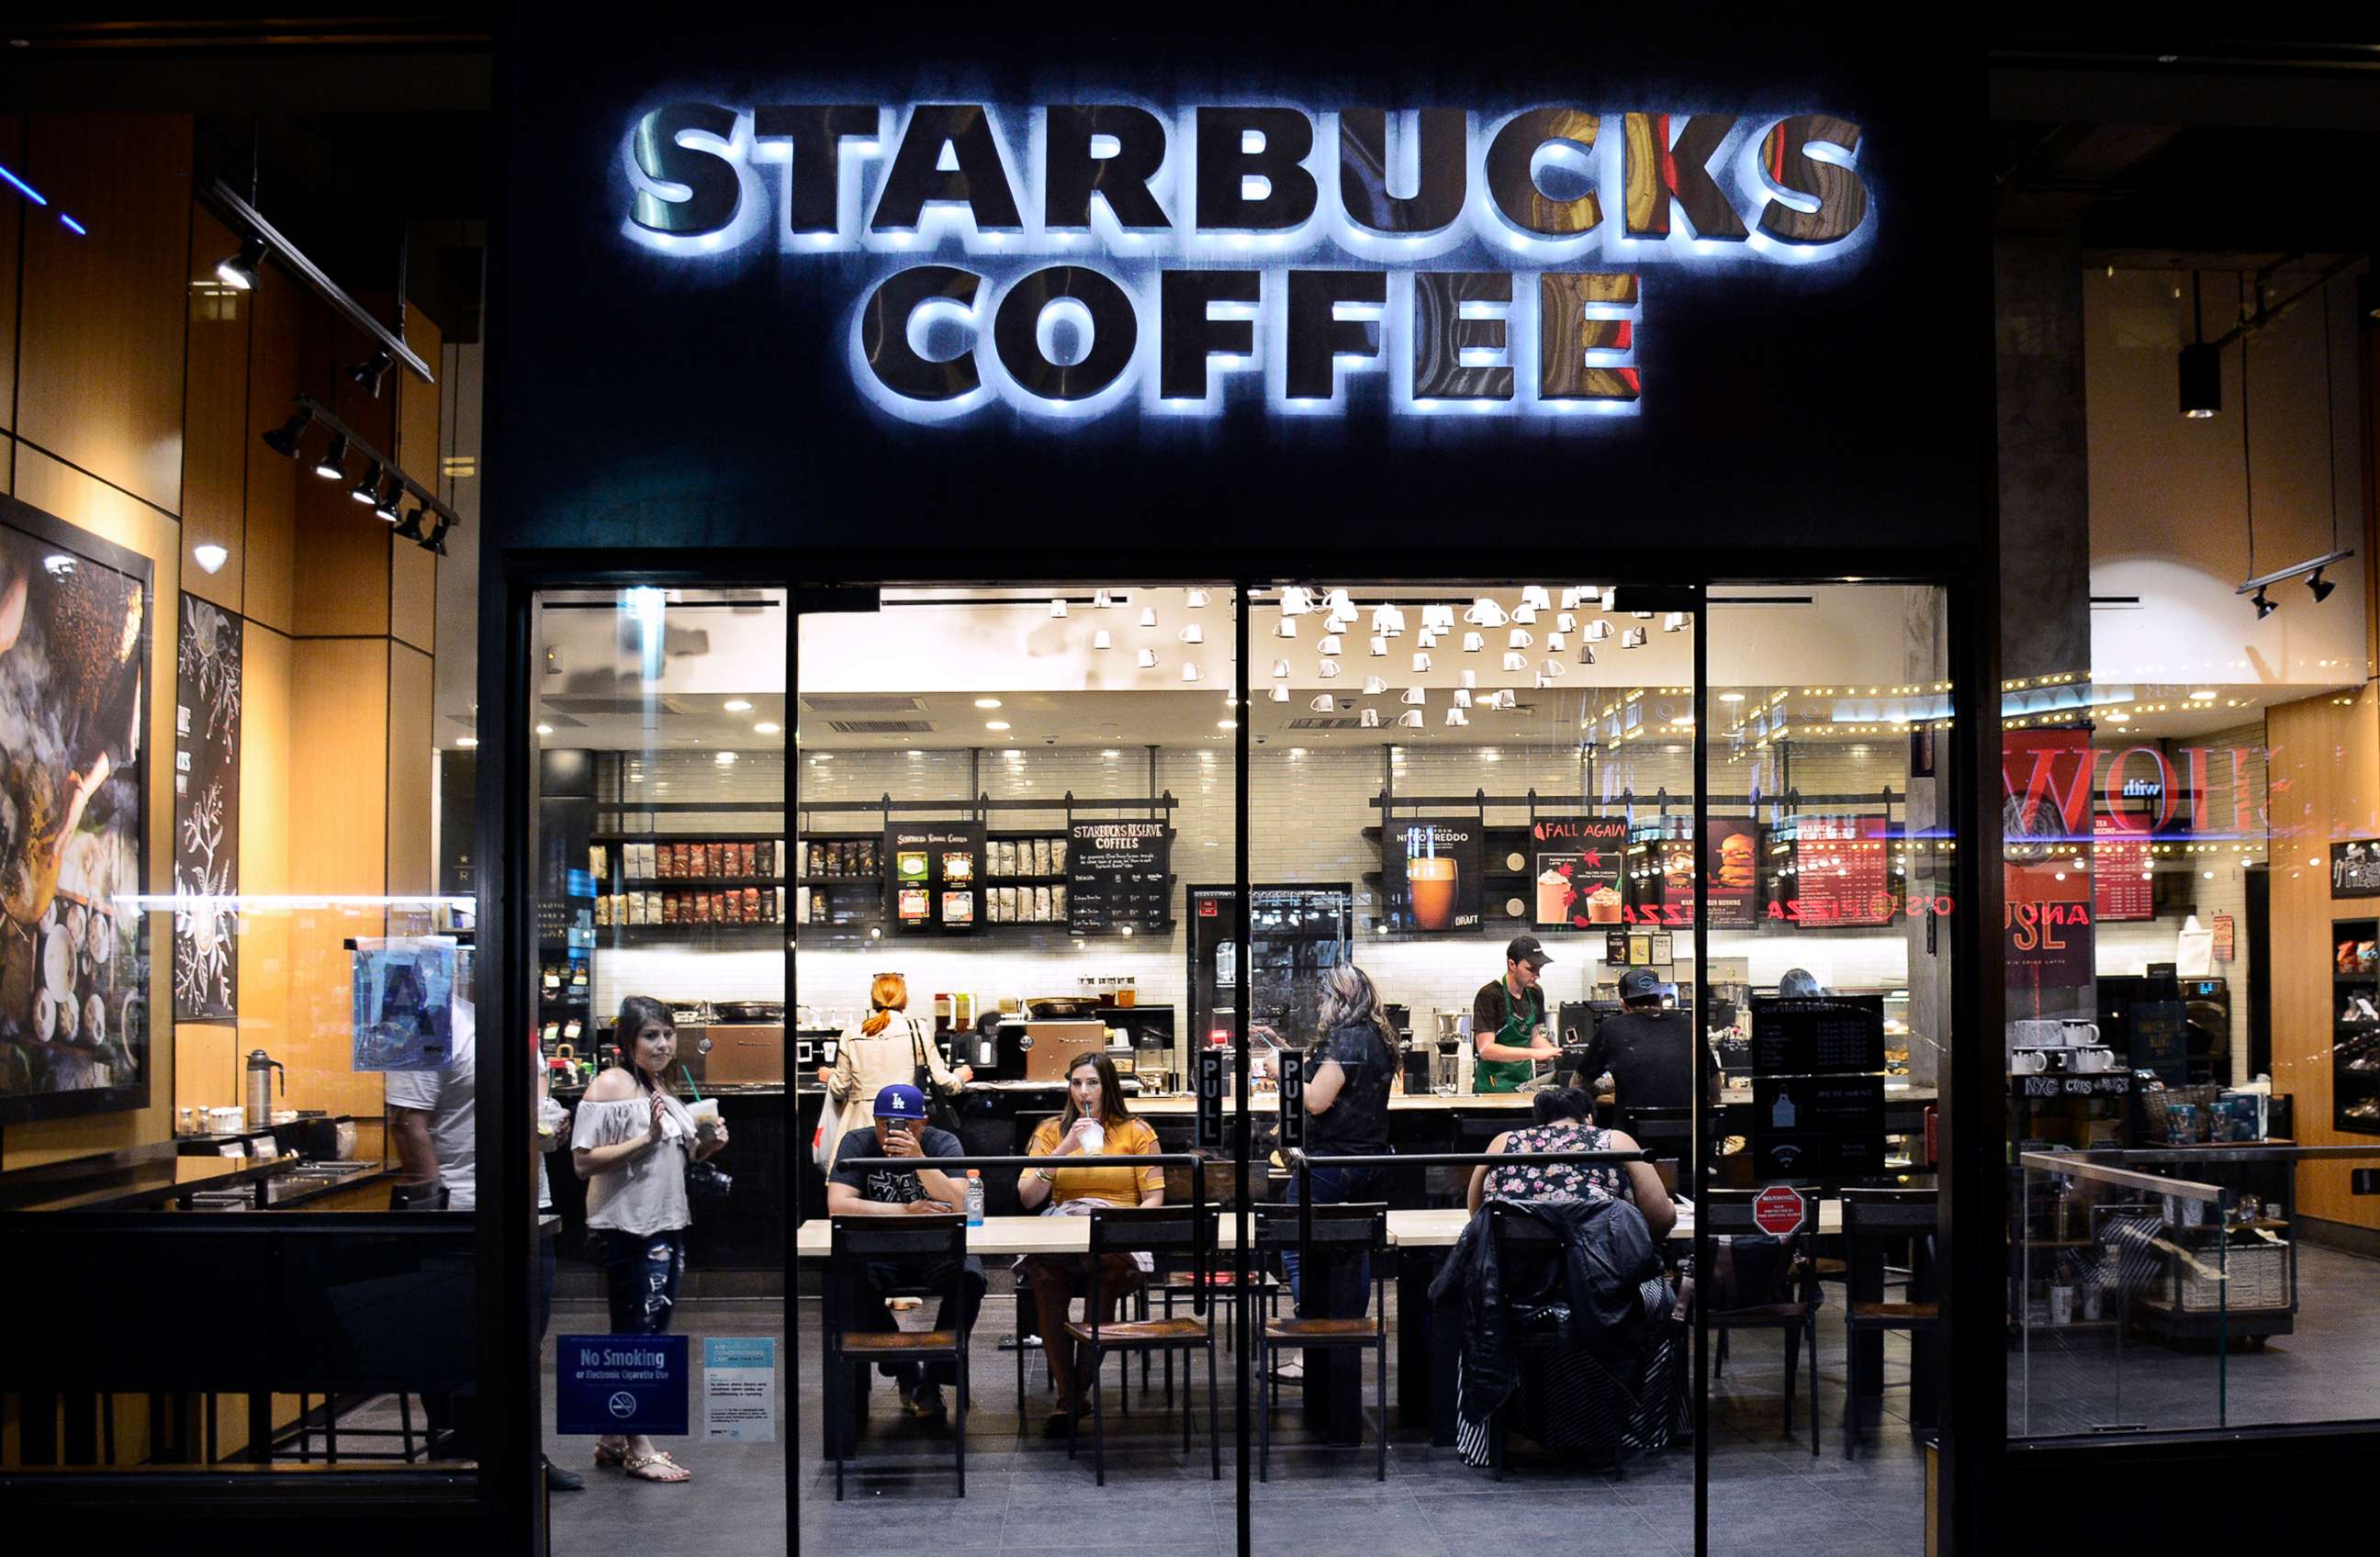 PHOTO: Customers eat and drink in a Starbucks Coffee shop in New York City.